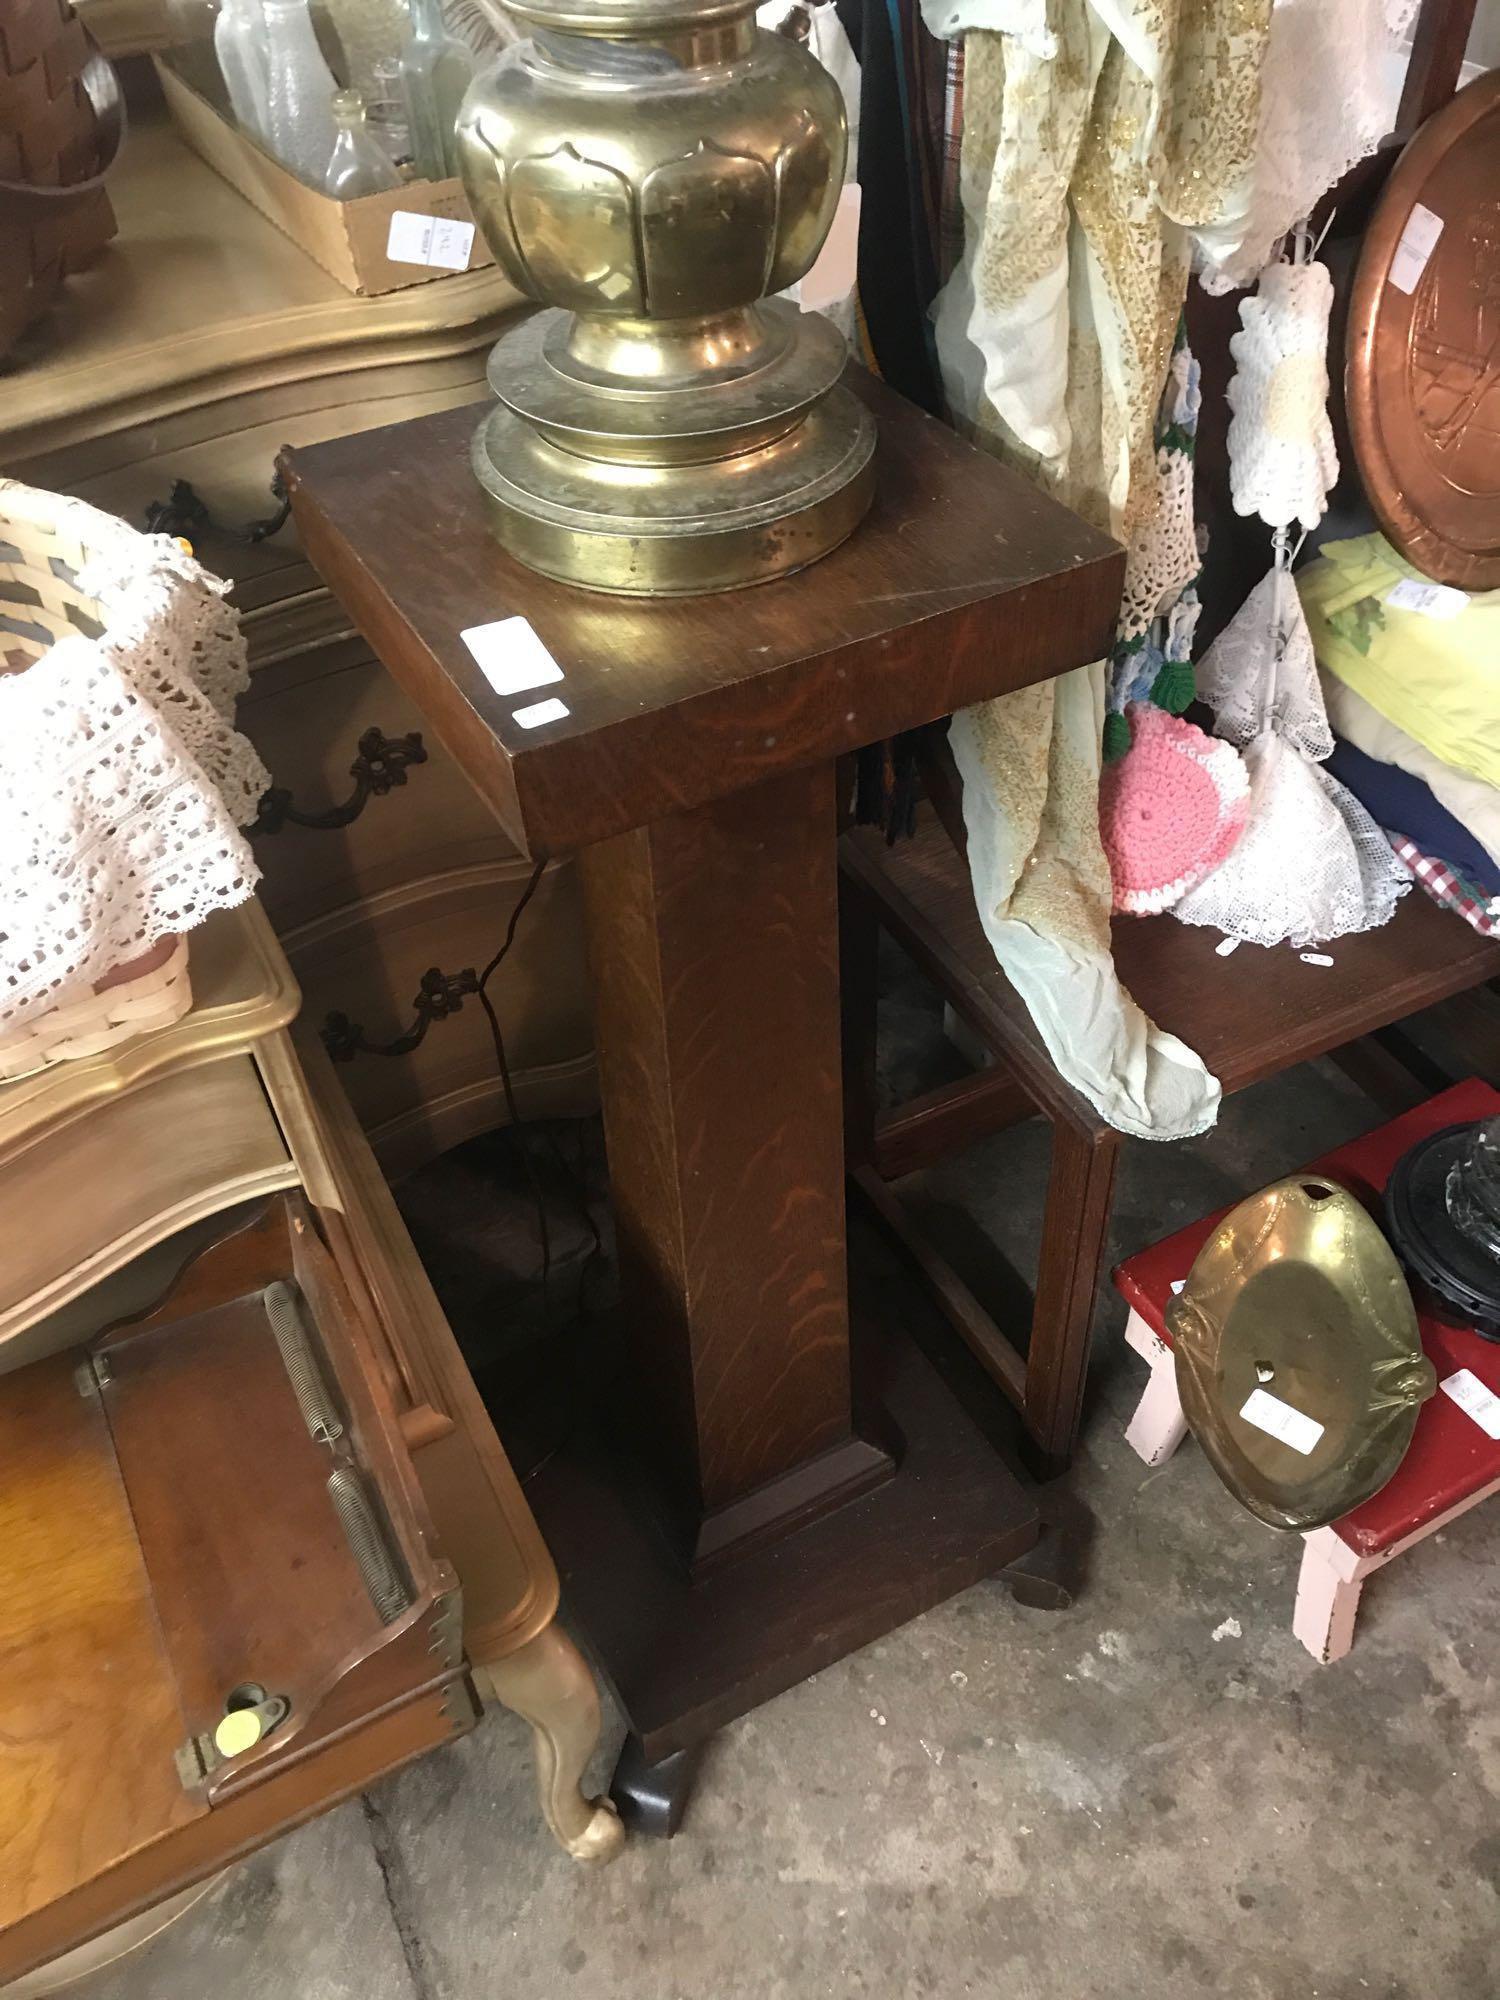 Fabulous Footed Wooden Pedestal Plant or sculpture stand